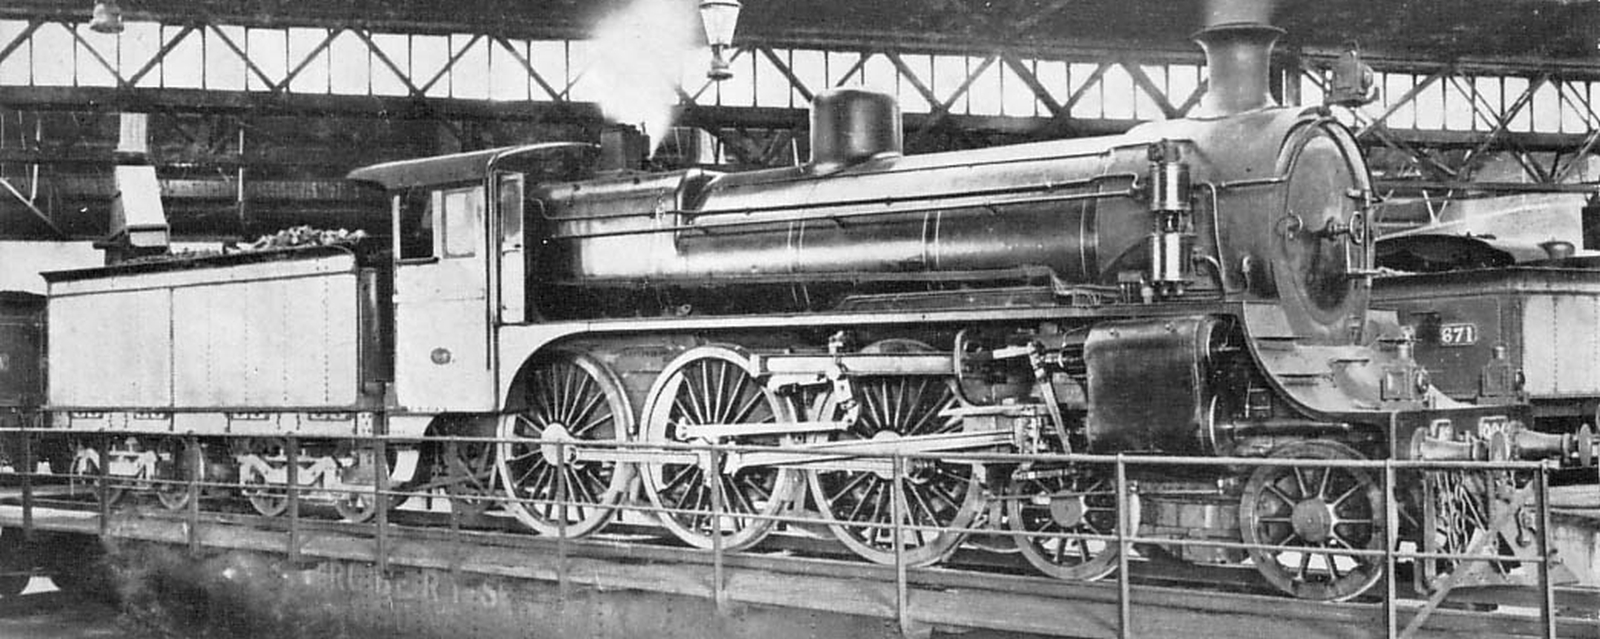 No. 986, which is still operational today, around 1916 on the turntable in what was then the North Melbourne depot